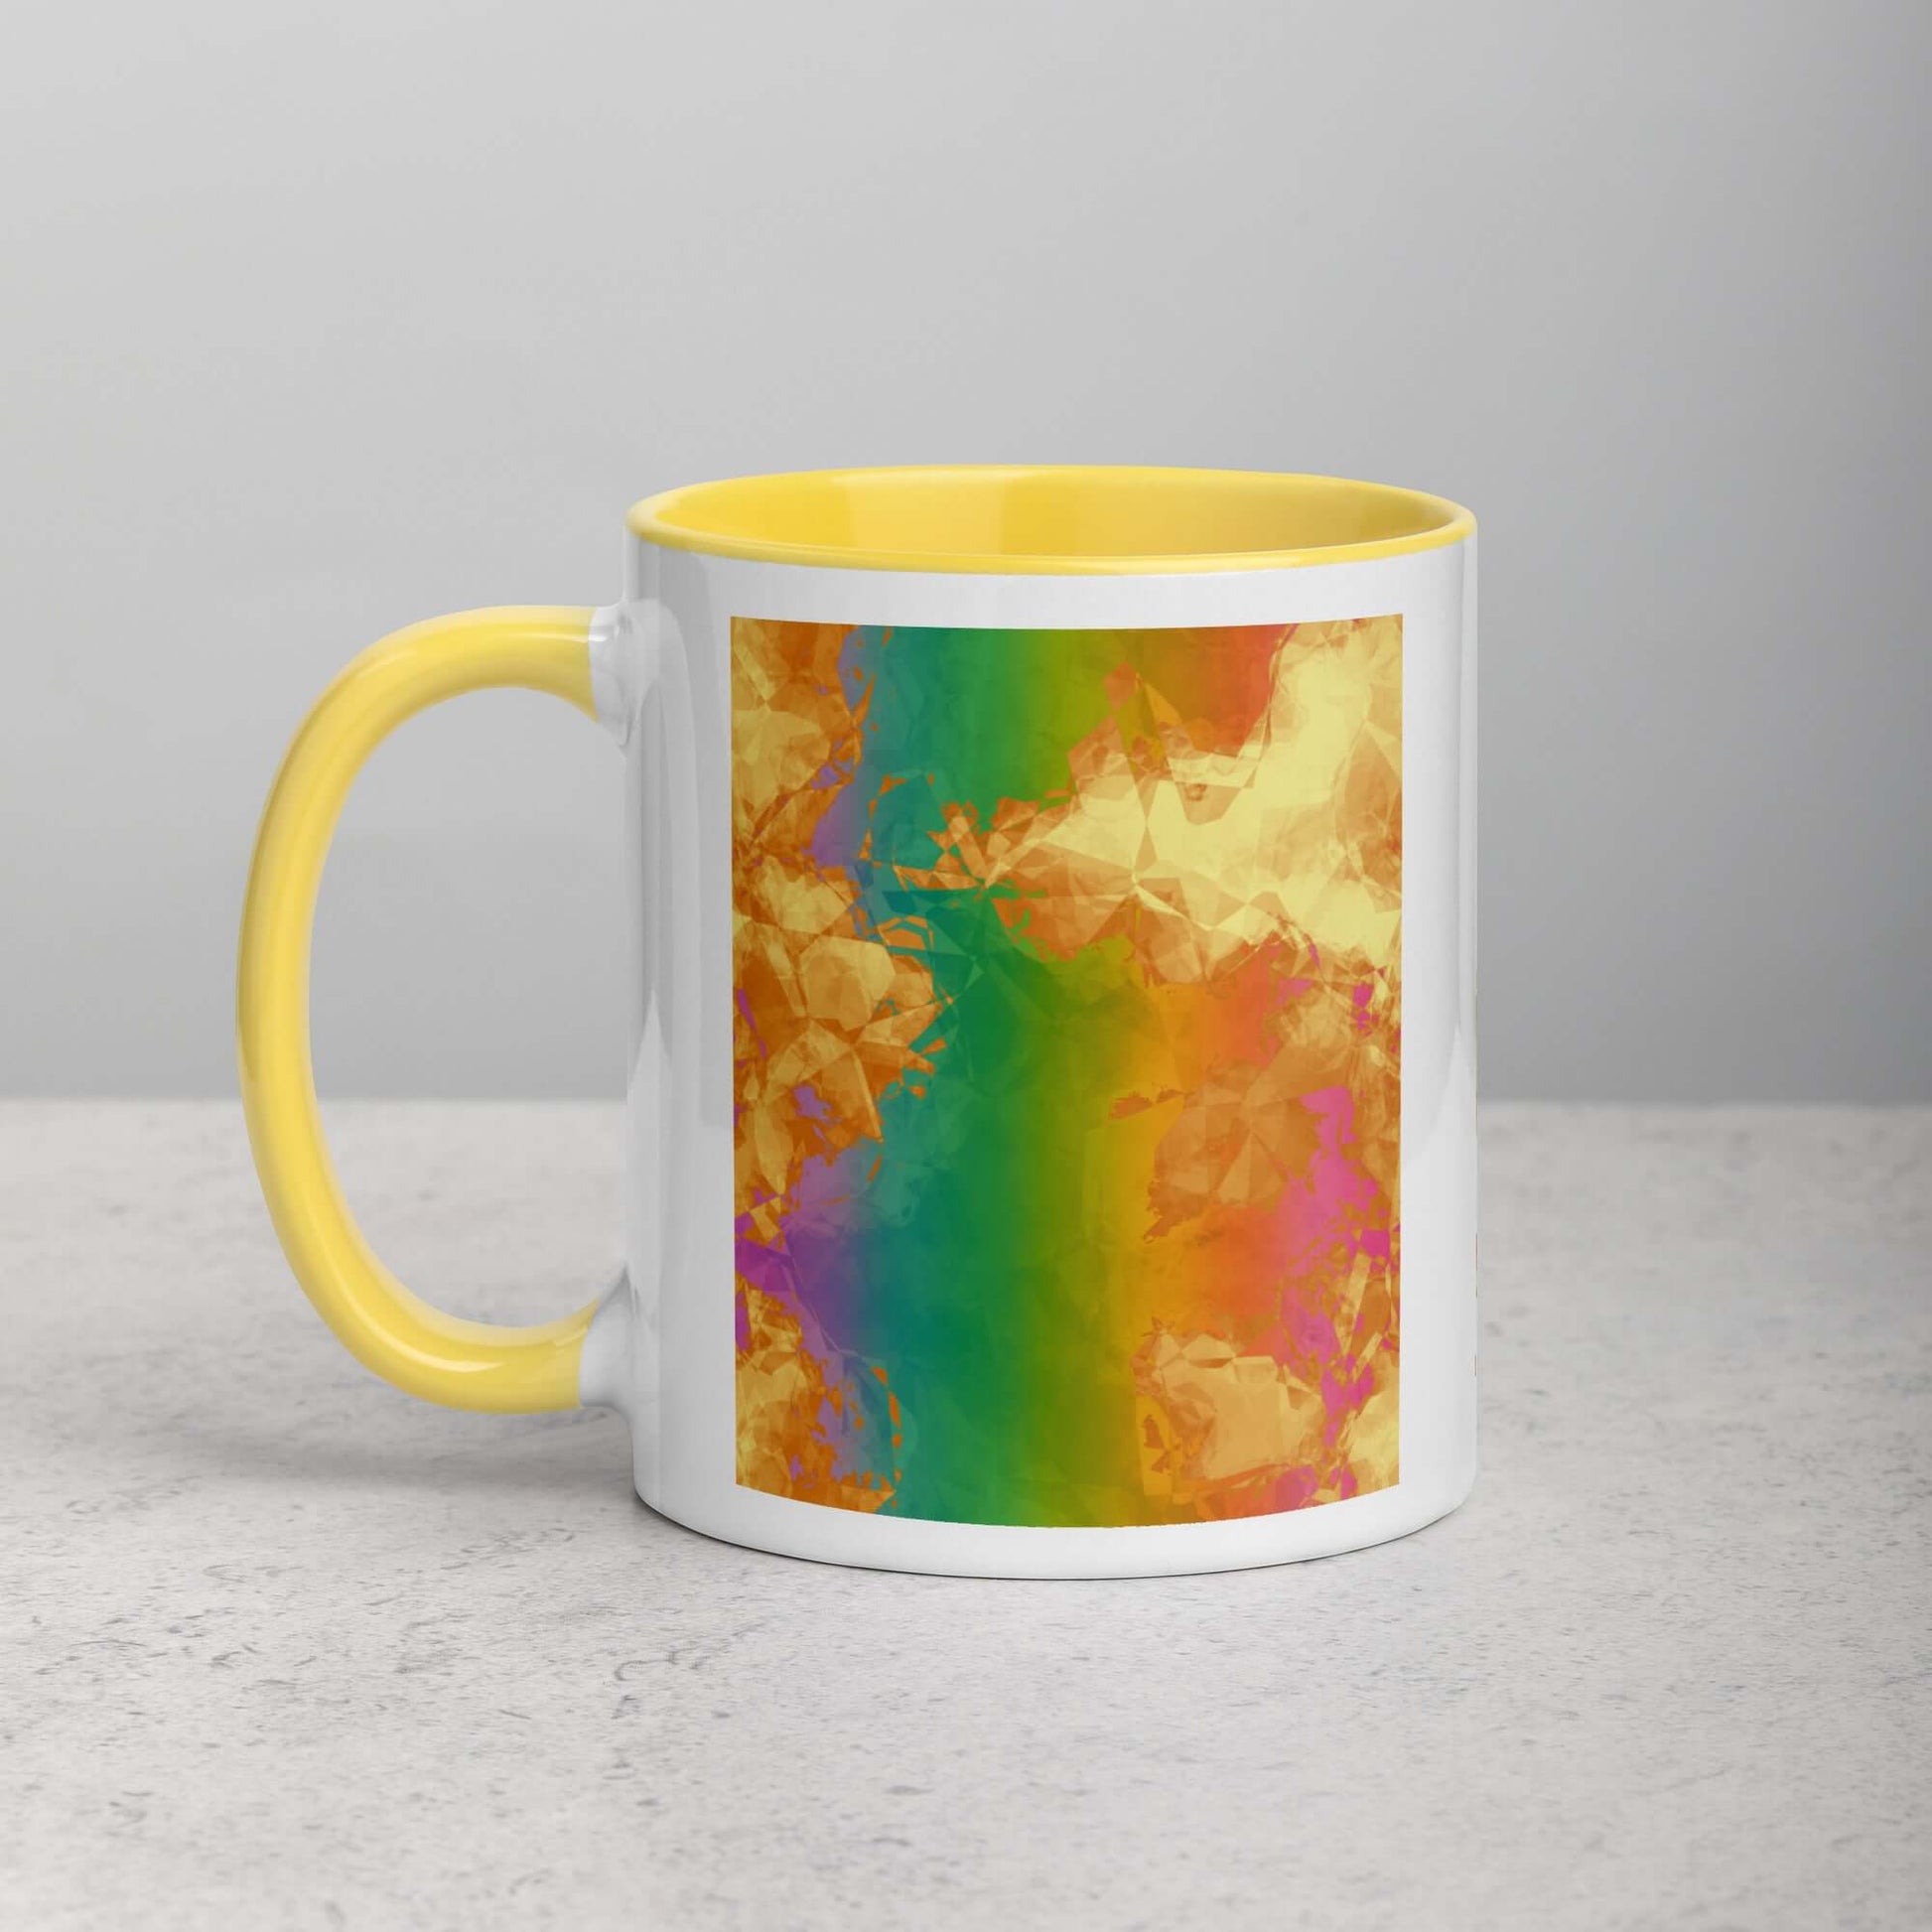 Fiery Rainbow “Rainbow Geode” Abstract Art Mug with Bright Yellow Color Inside Left Handed Front View